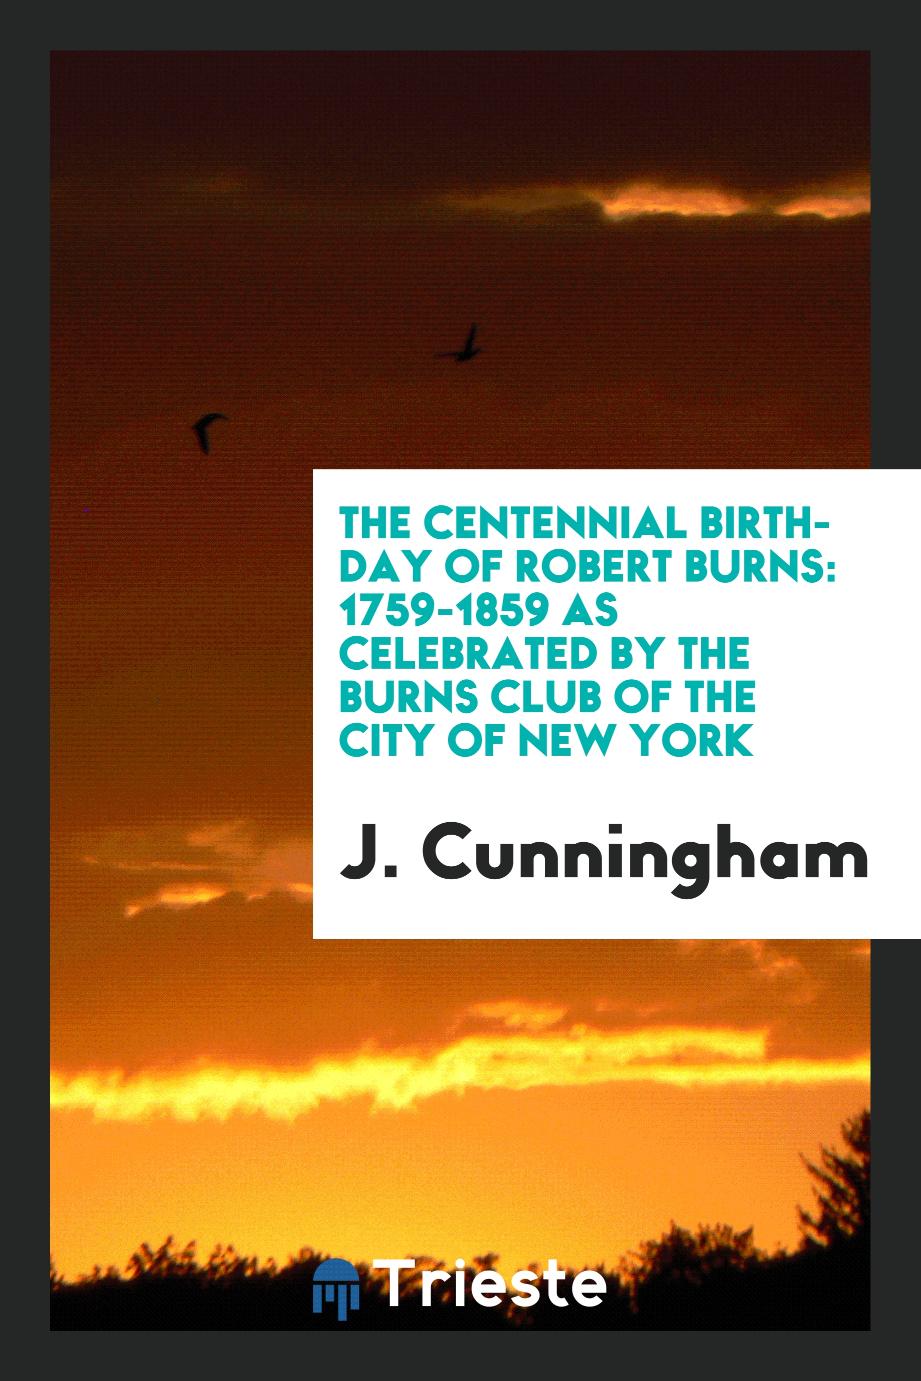 The Centennial Birth-Day of Robert Burns: 1759-1859 as Celebrated by the Burns Club of the City of New York